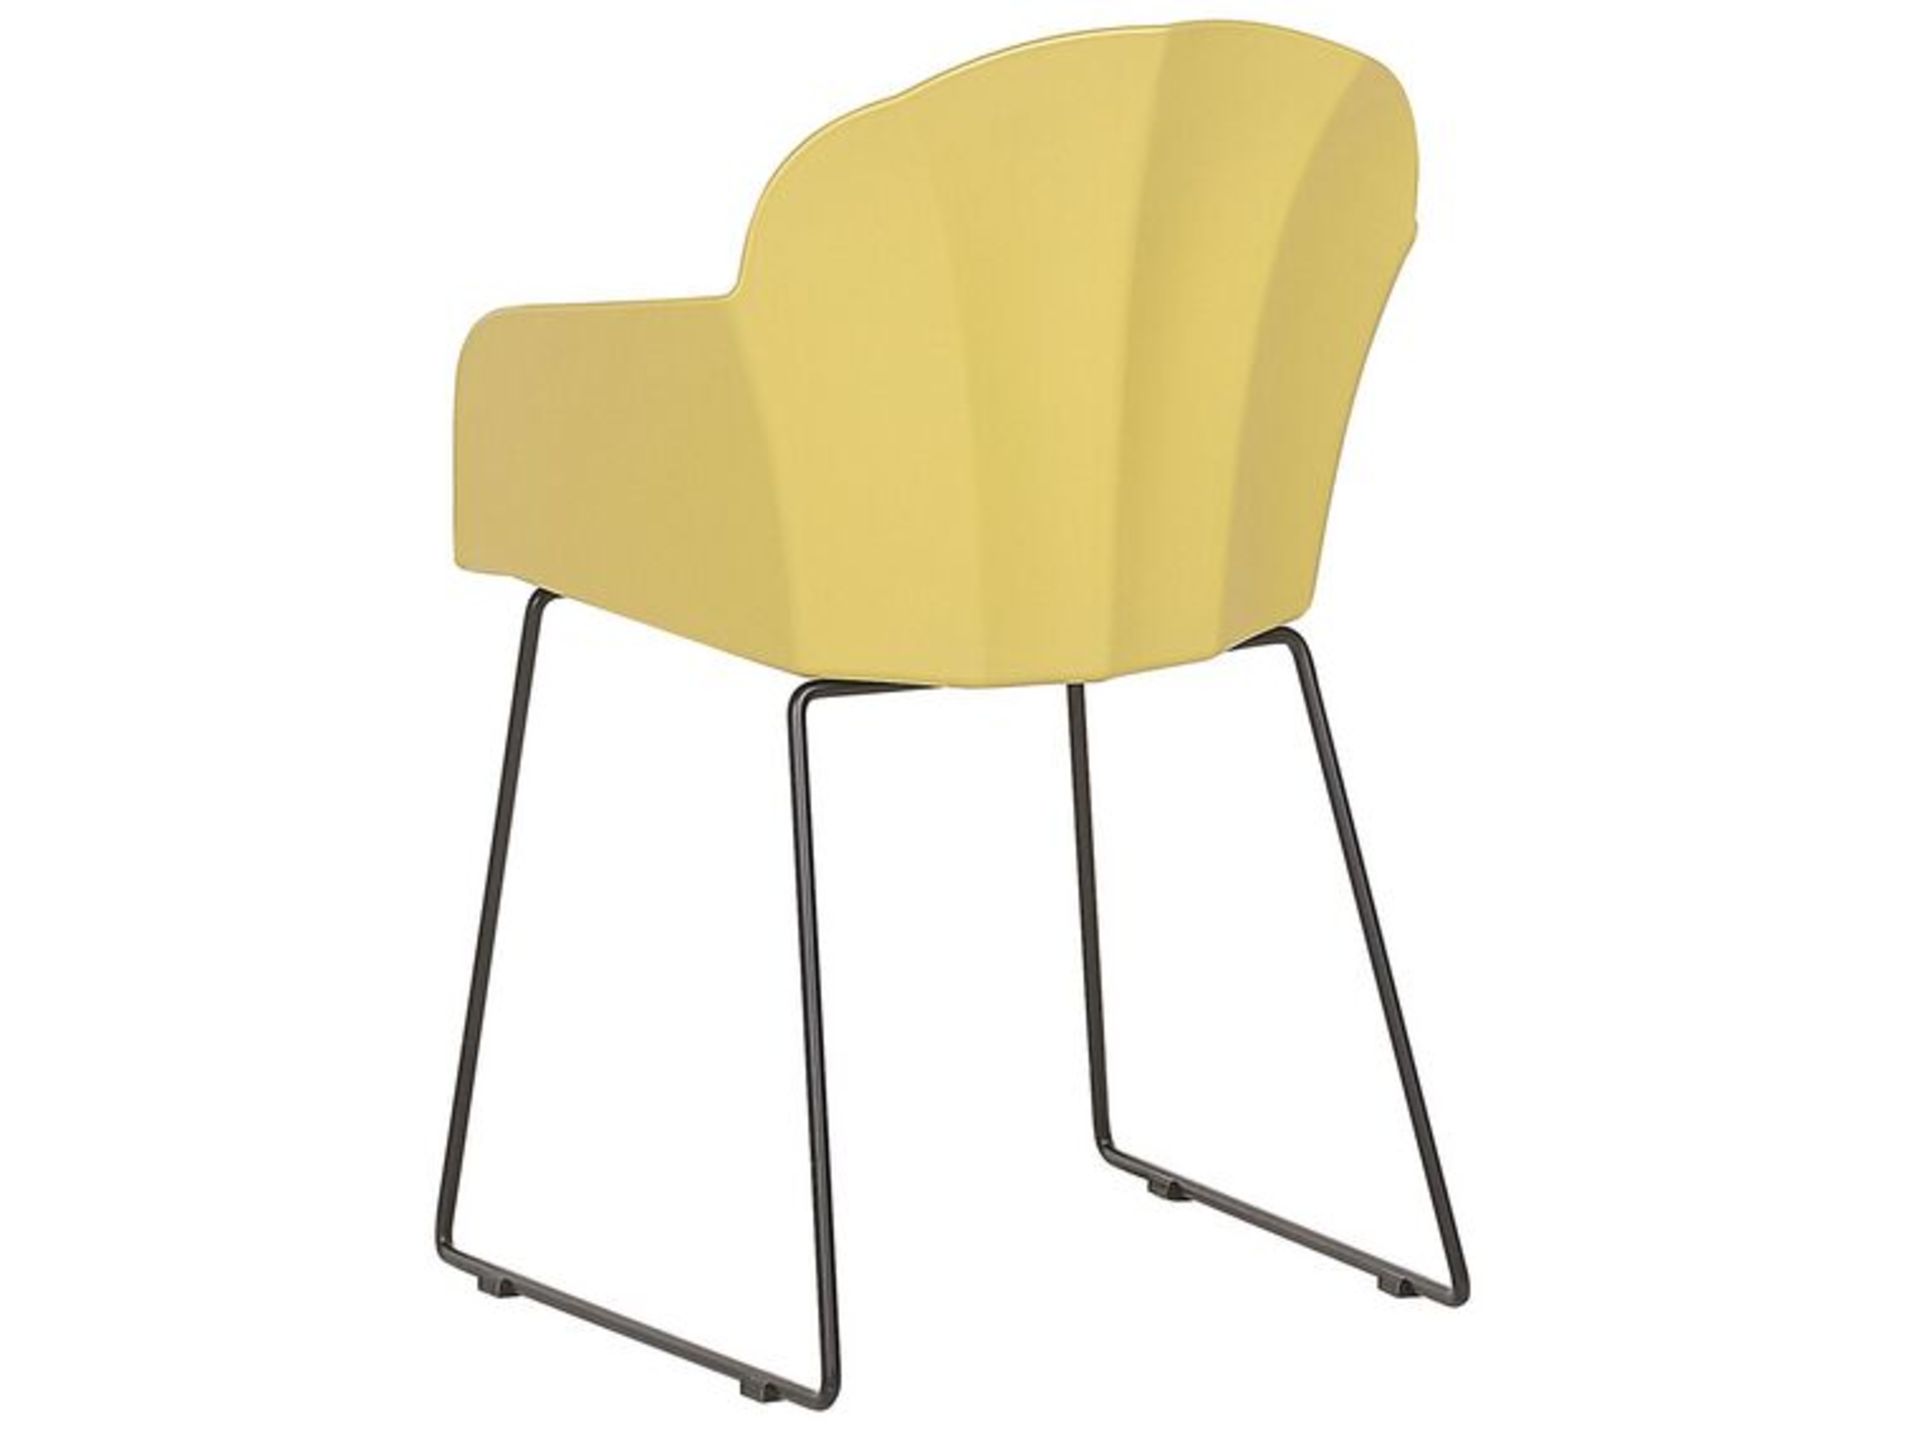 Sylva Set of 2 Dining Chairs Yellow. - SR6. RRP £199.99. Dining chairs should first and foremost - Image 2 of 2